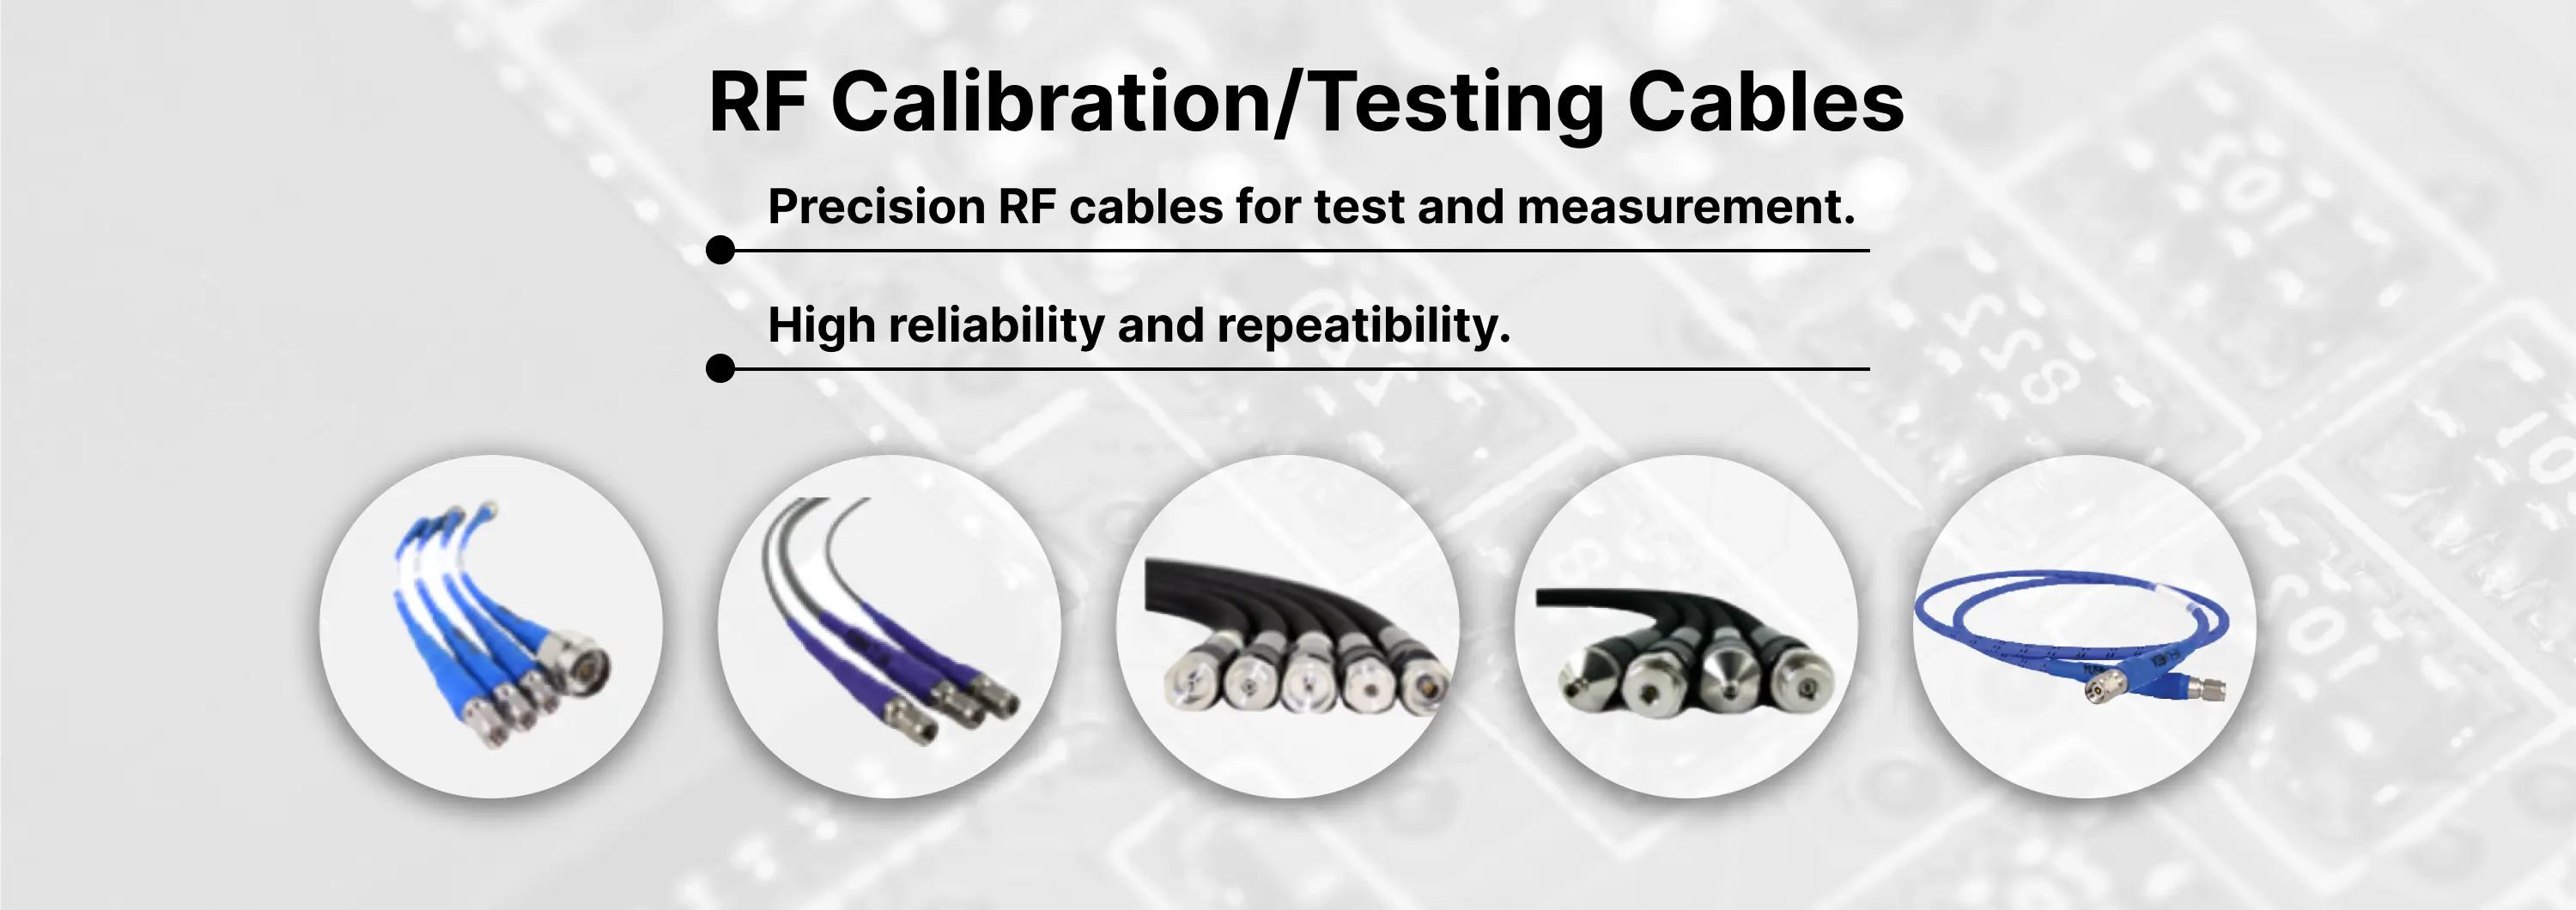 RF Calibration/Testing Cables Banner